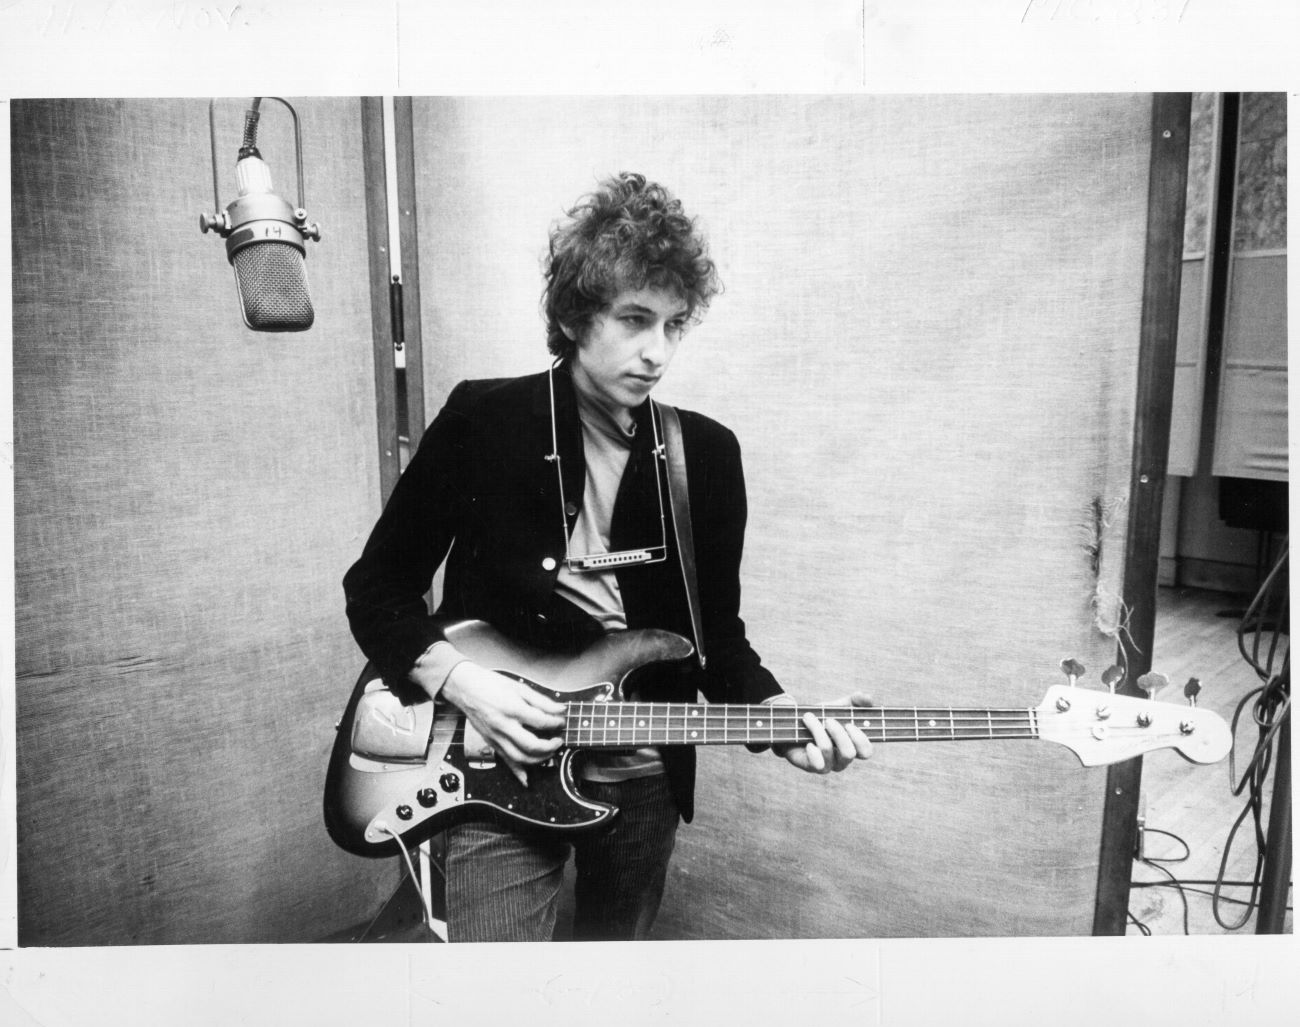 A black and white picture of Bob Dylan playing a guitar with a harmonica around his neck.